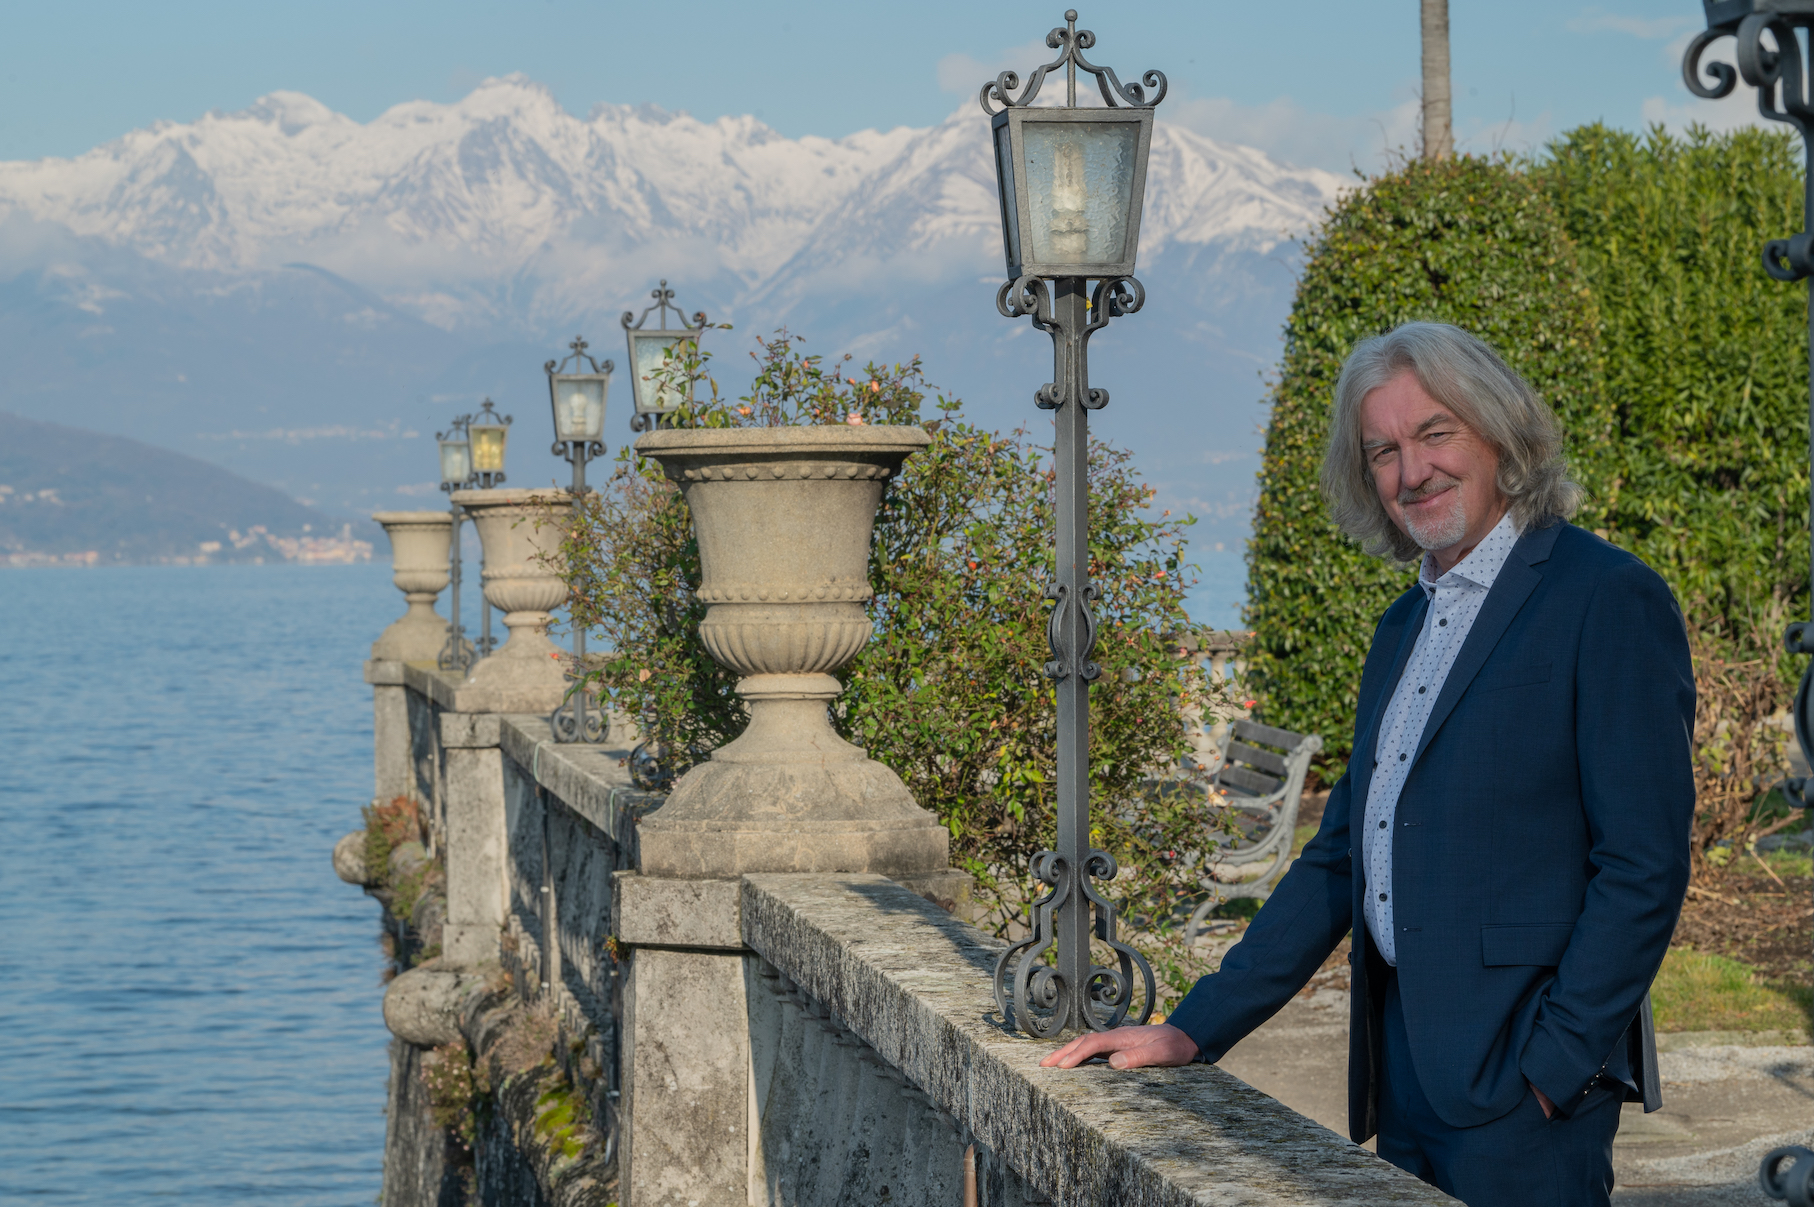 james may tour of italy